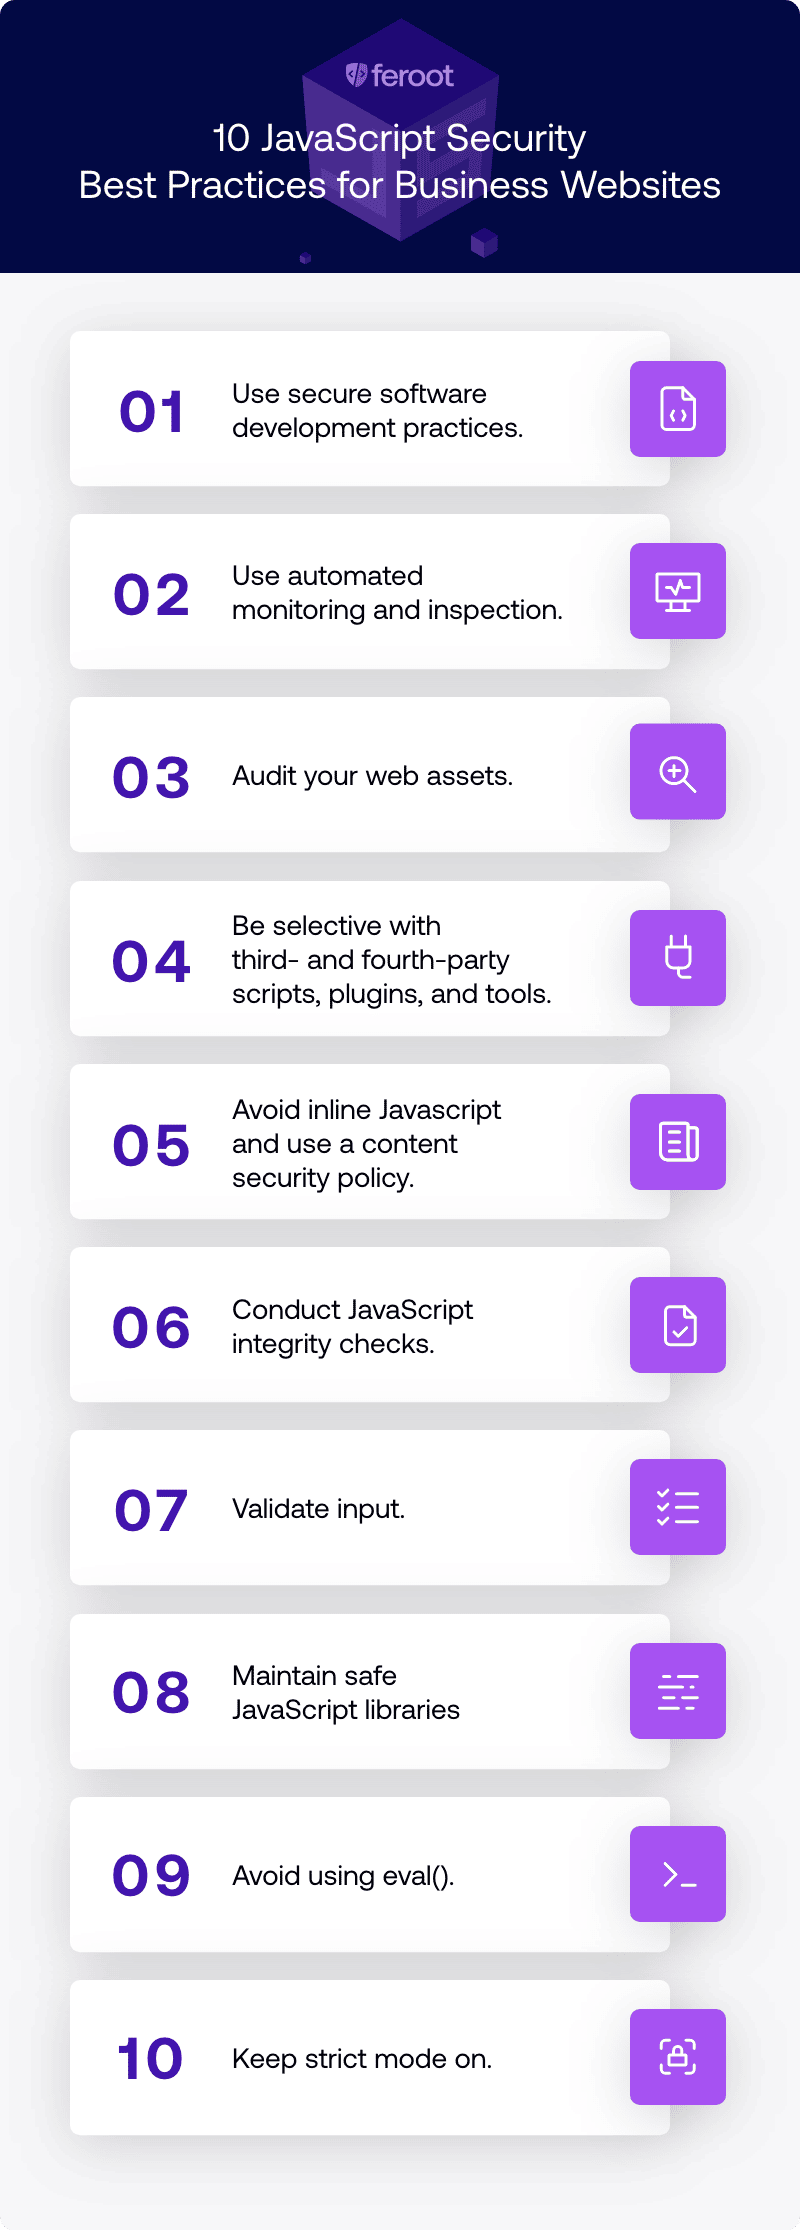 10 JavaScript Security Best Practices for Business Websites